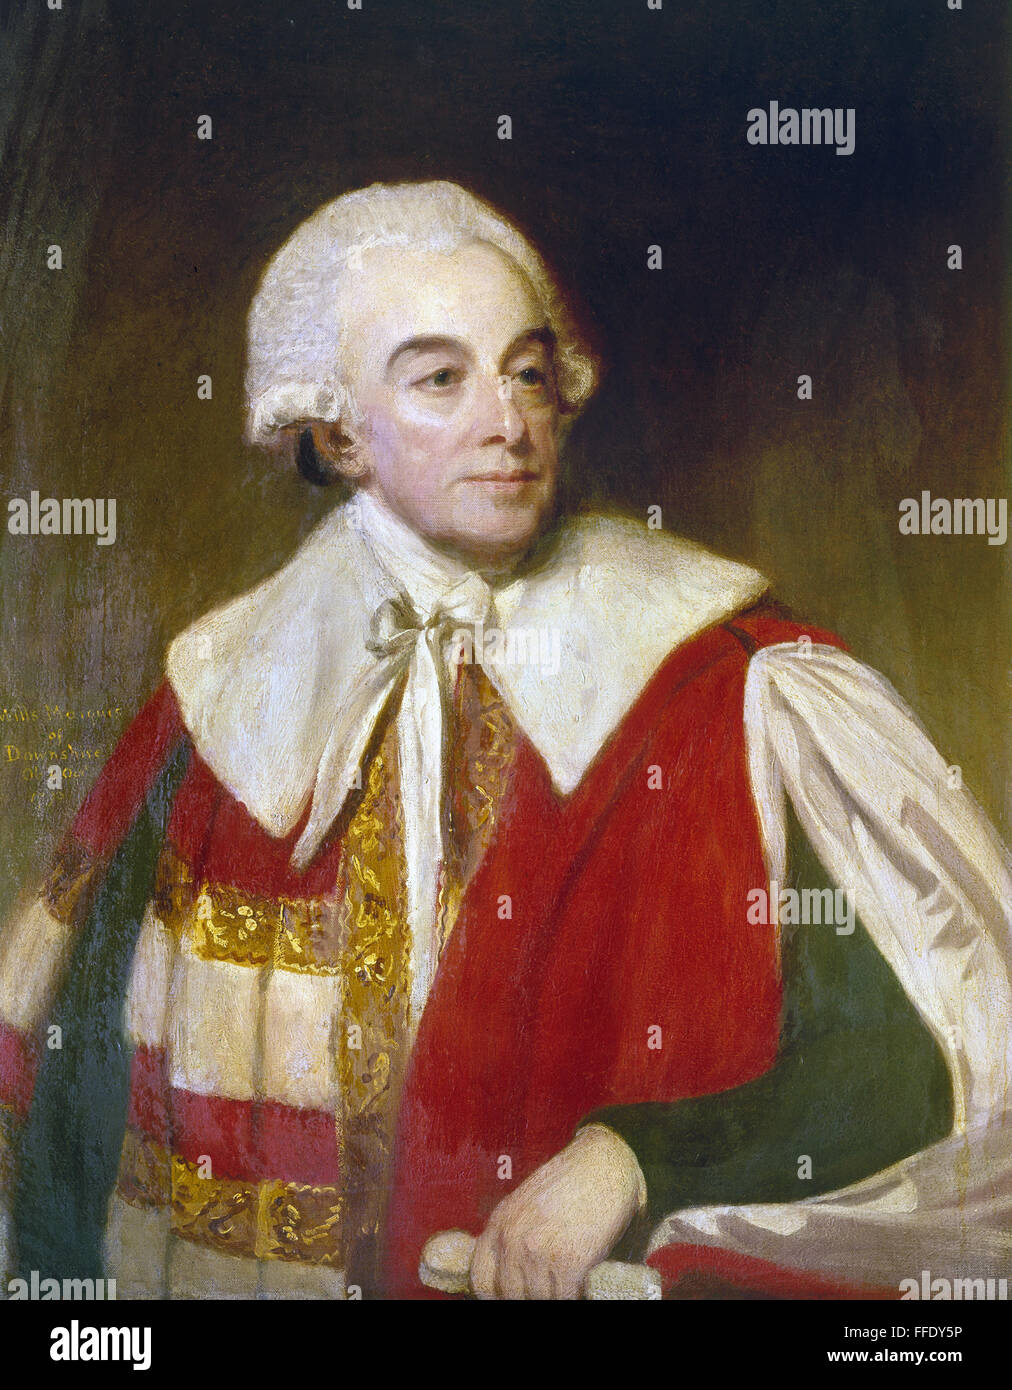 VISCOUNT OF HILLSBOROUGH /nWills Hill (1718-1793). British politician and colonial administrator. Oil on canvas by George Romney, 18th century. Stock Photo